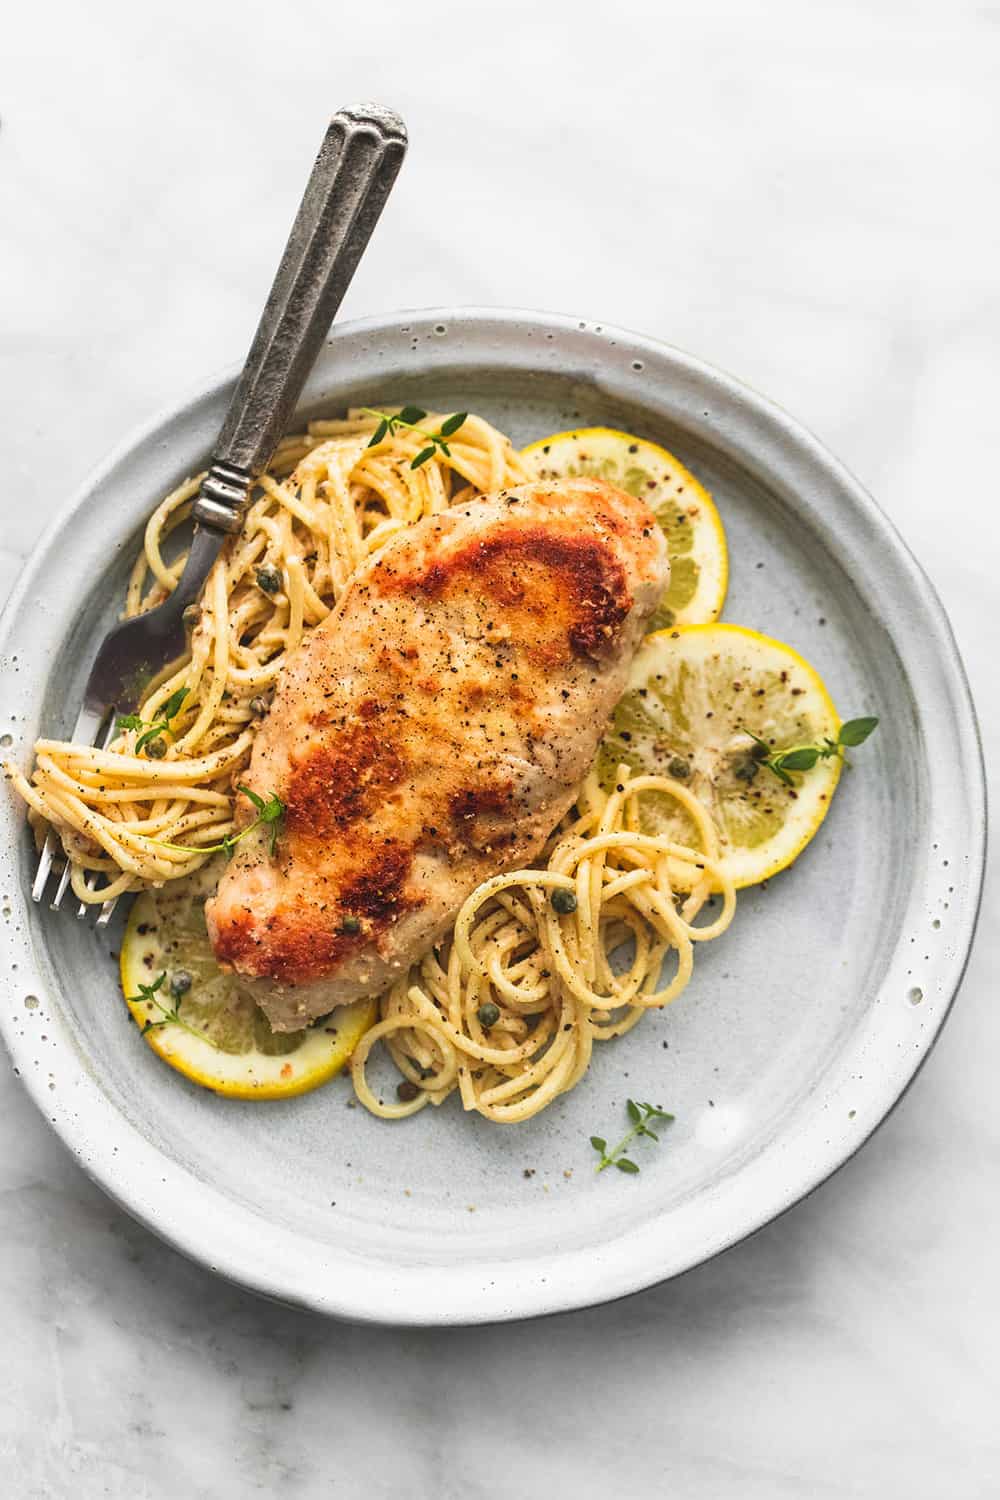 Slow Cooker Lemon Chicken Piccata on a plate with noodles and lemon slices.